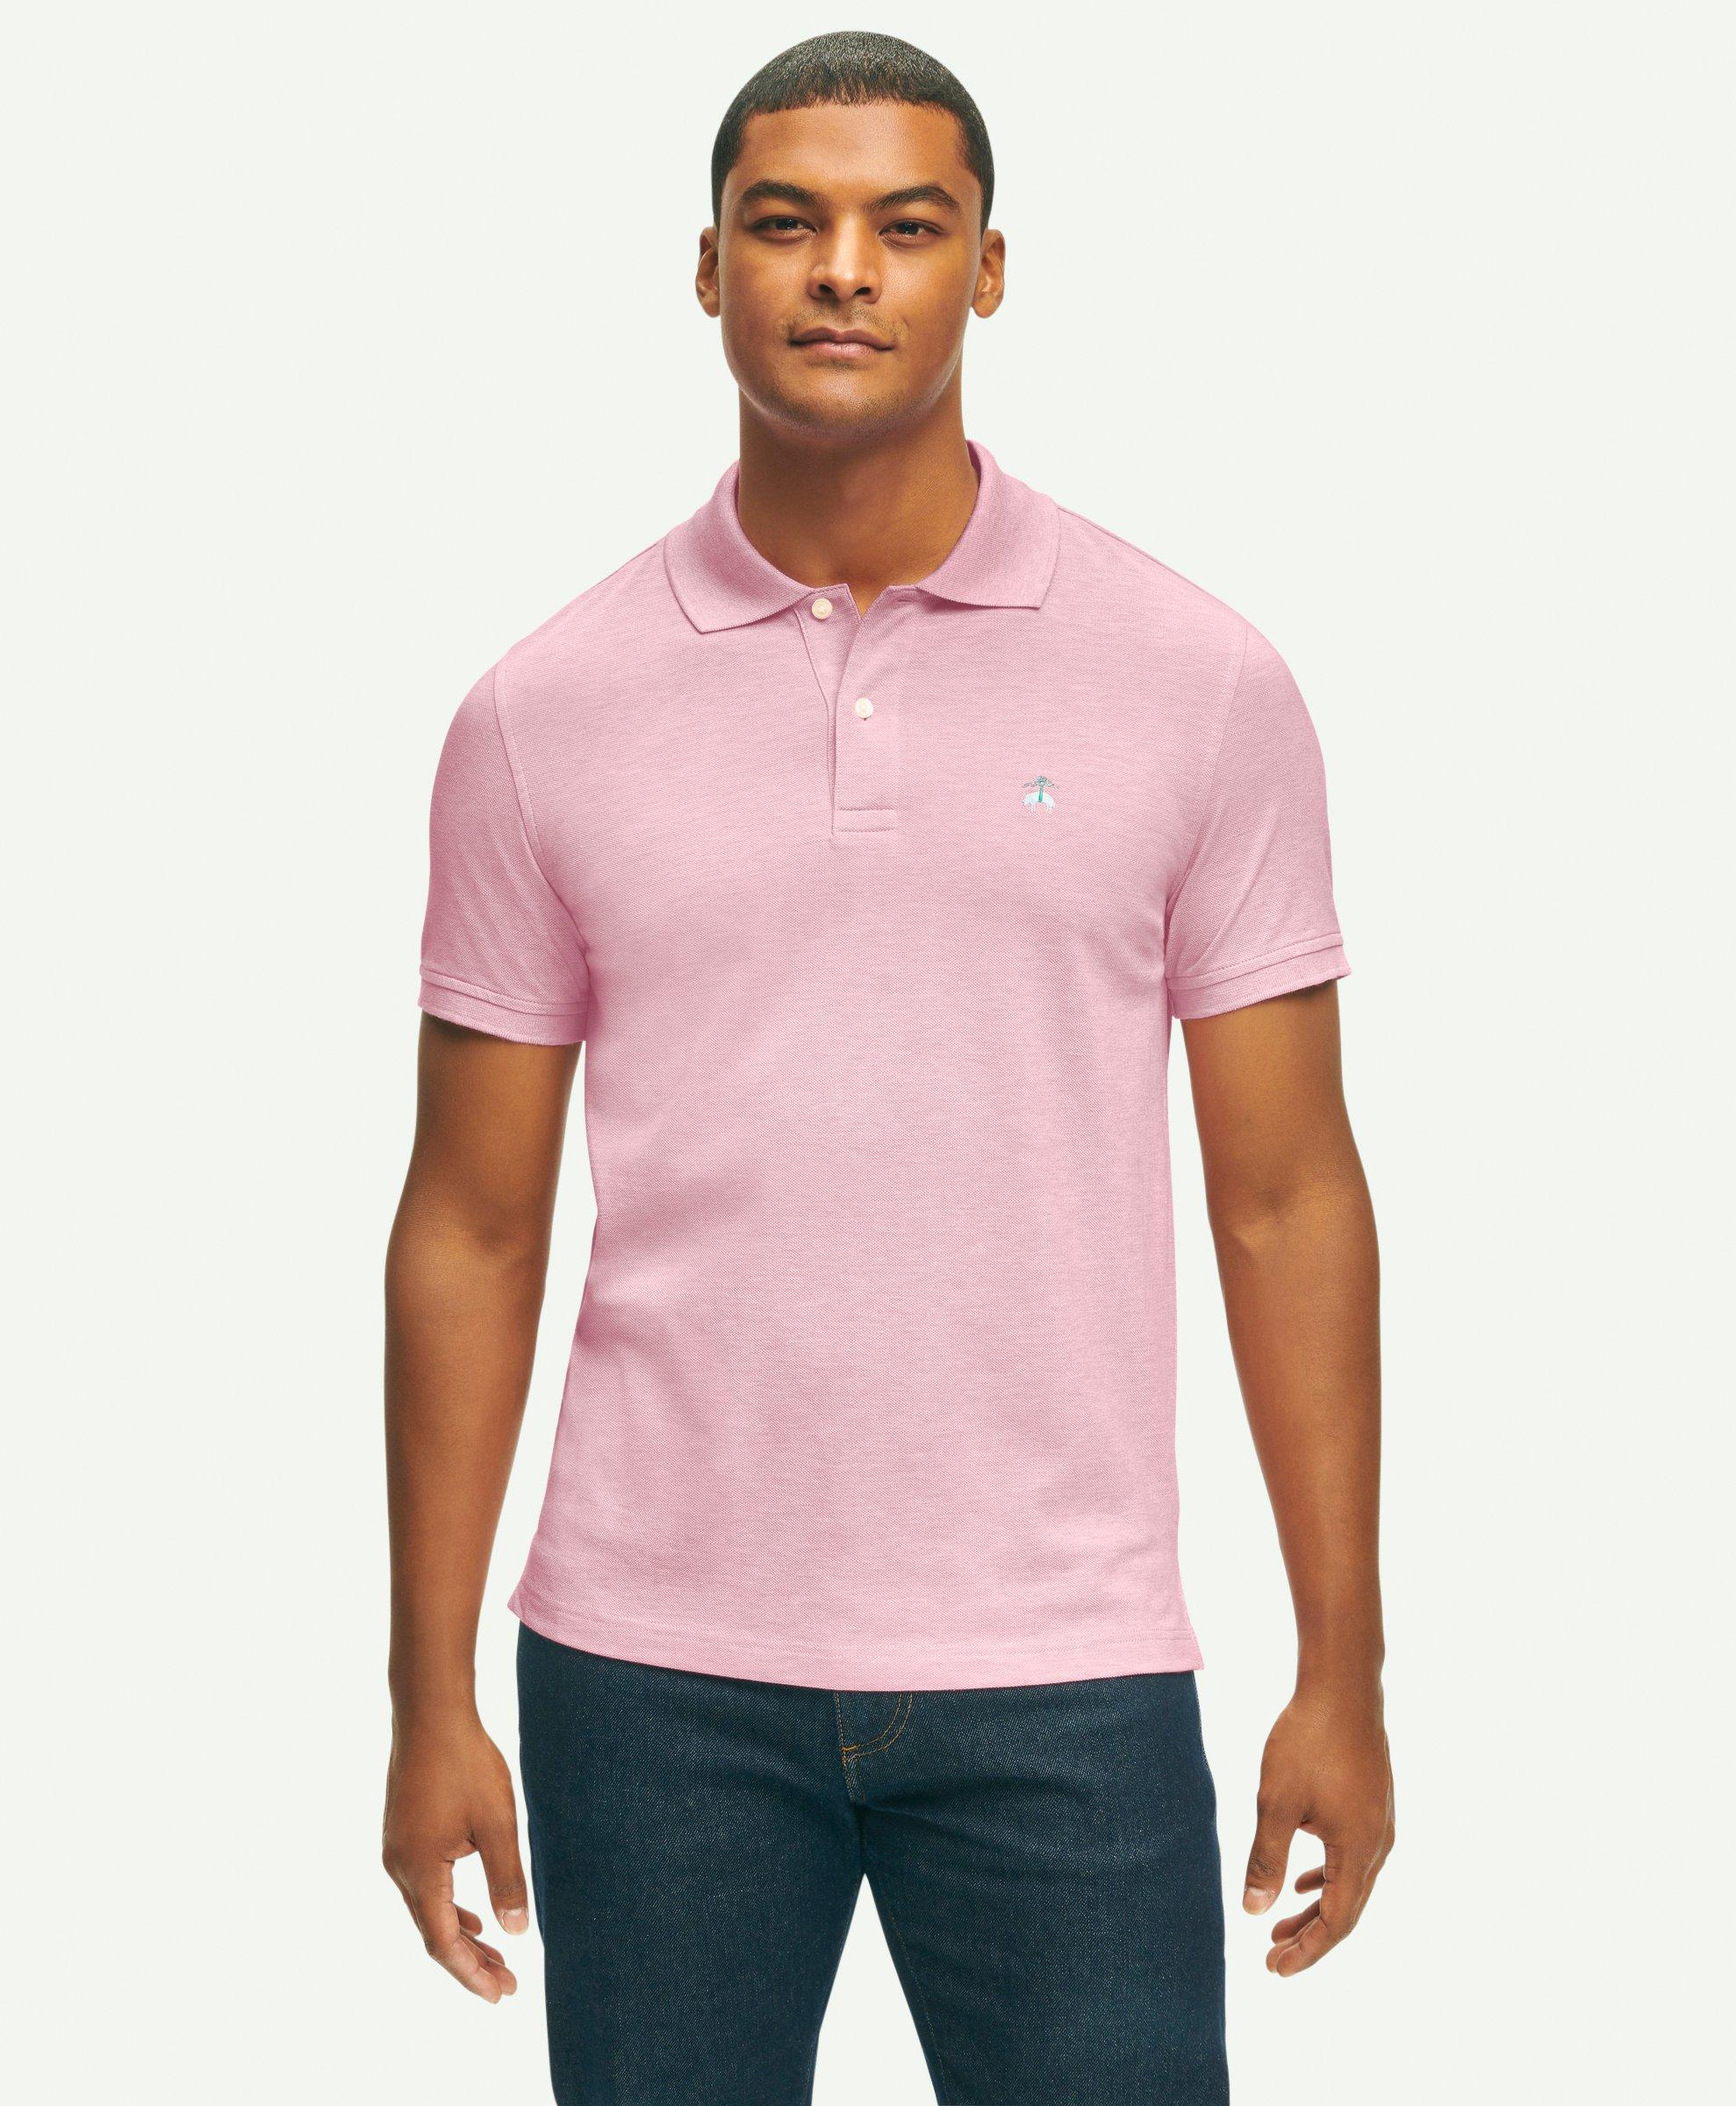 Brooks Brothers Golden Fleece Stretch Supima Polo Shirt | Pink | Size Small